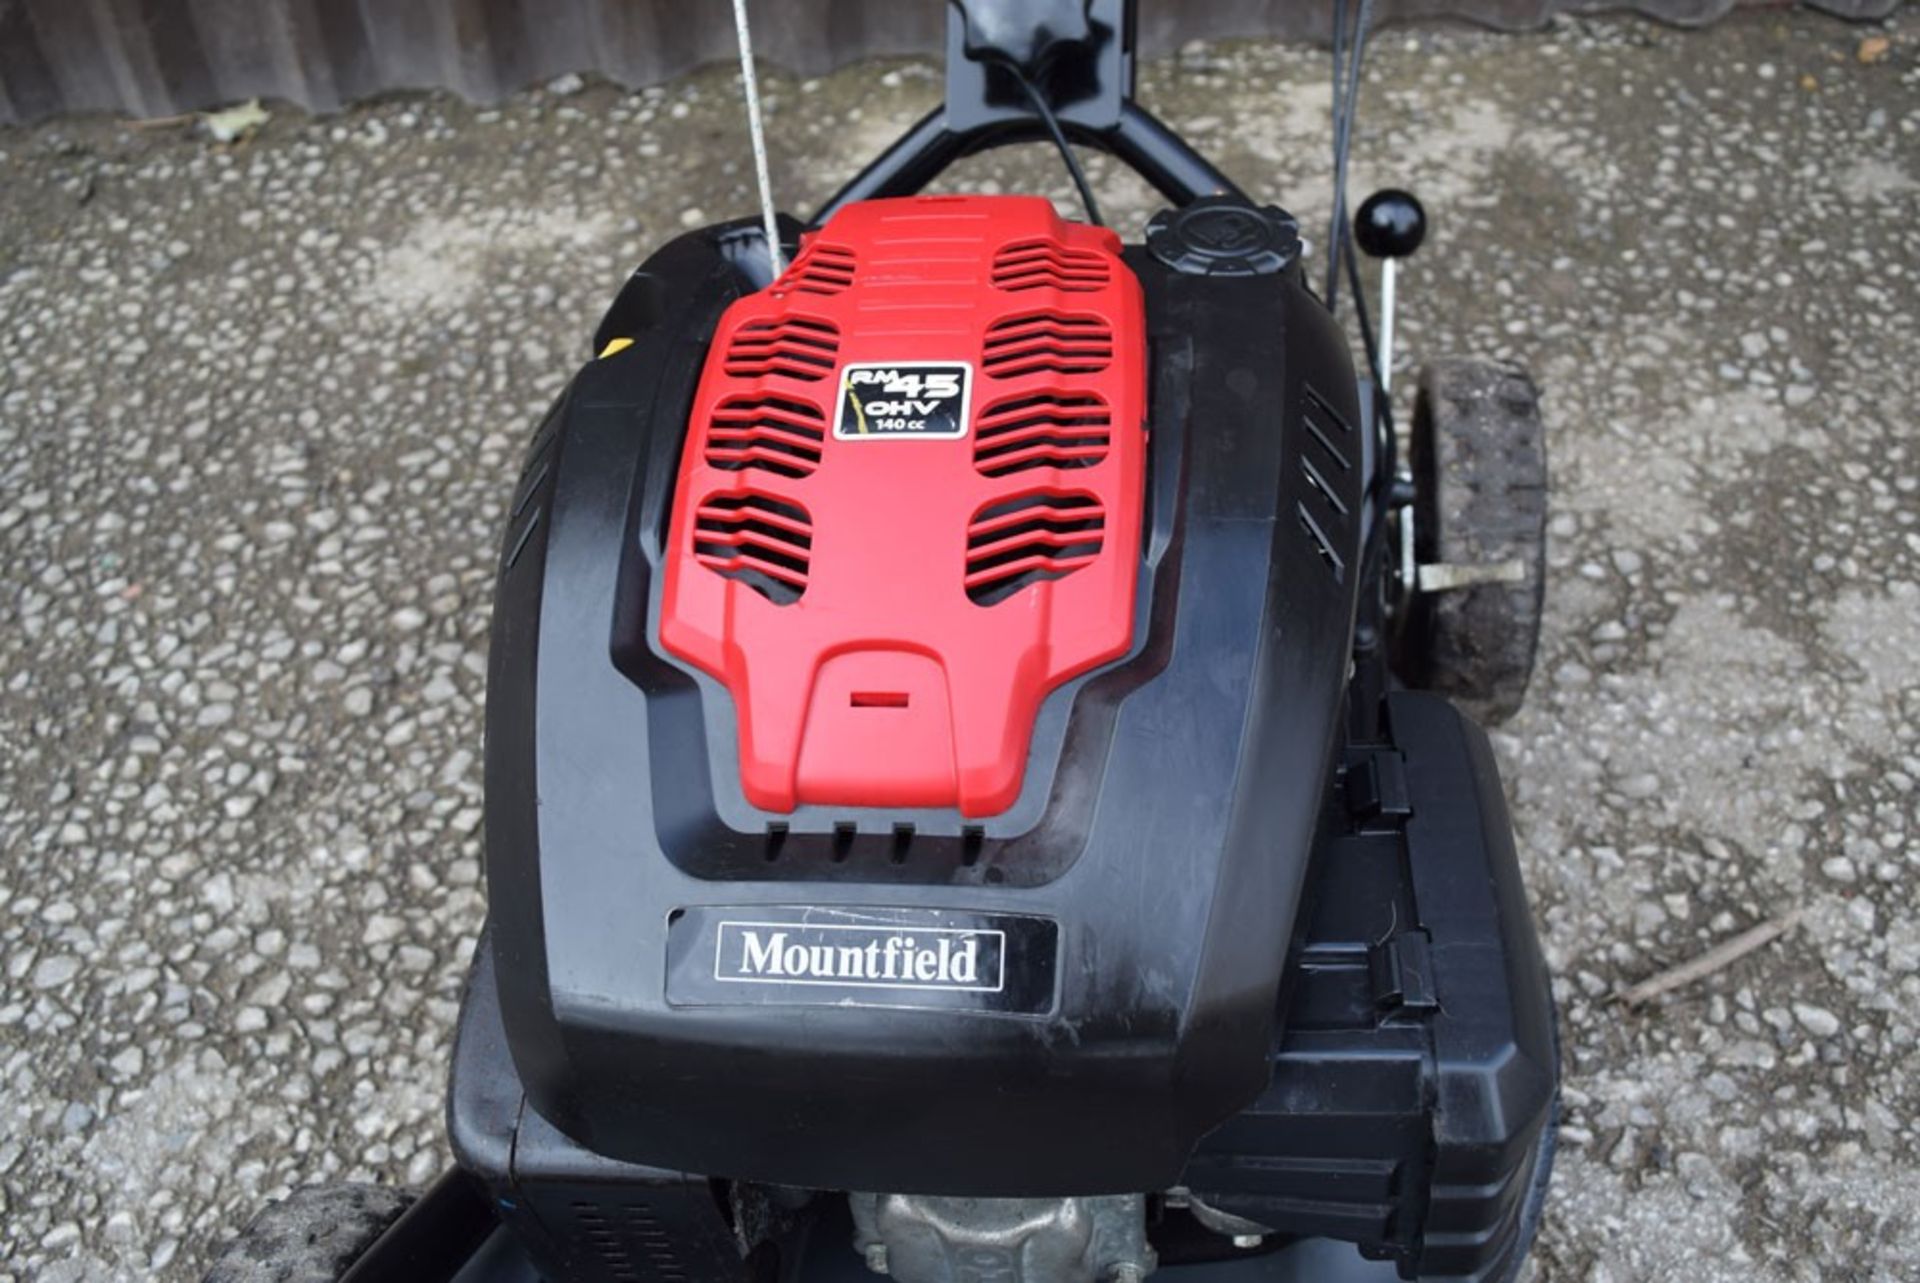 2009 Mountfield Multiclip 501 SP 48cm Self-Propelled Rotary Mower - Image 3 of 7